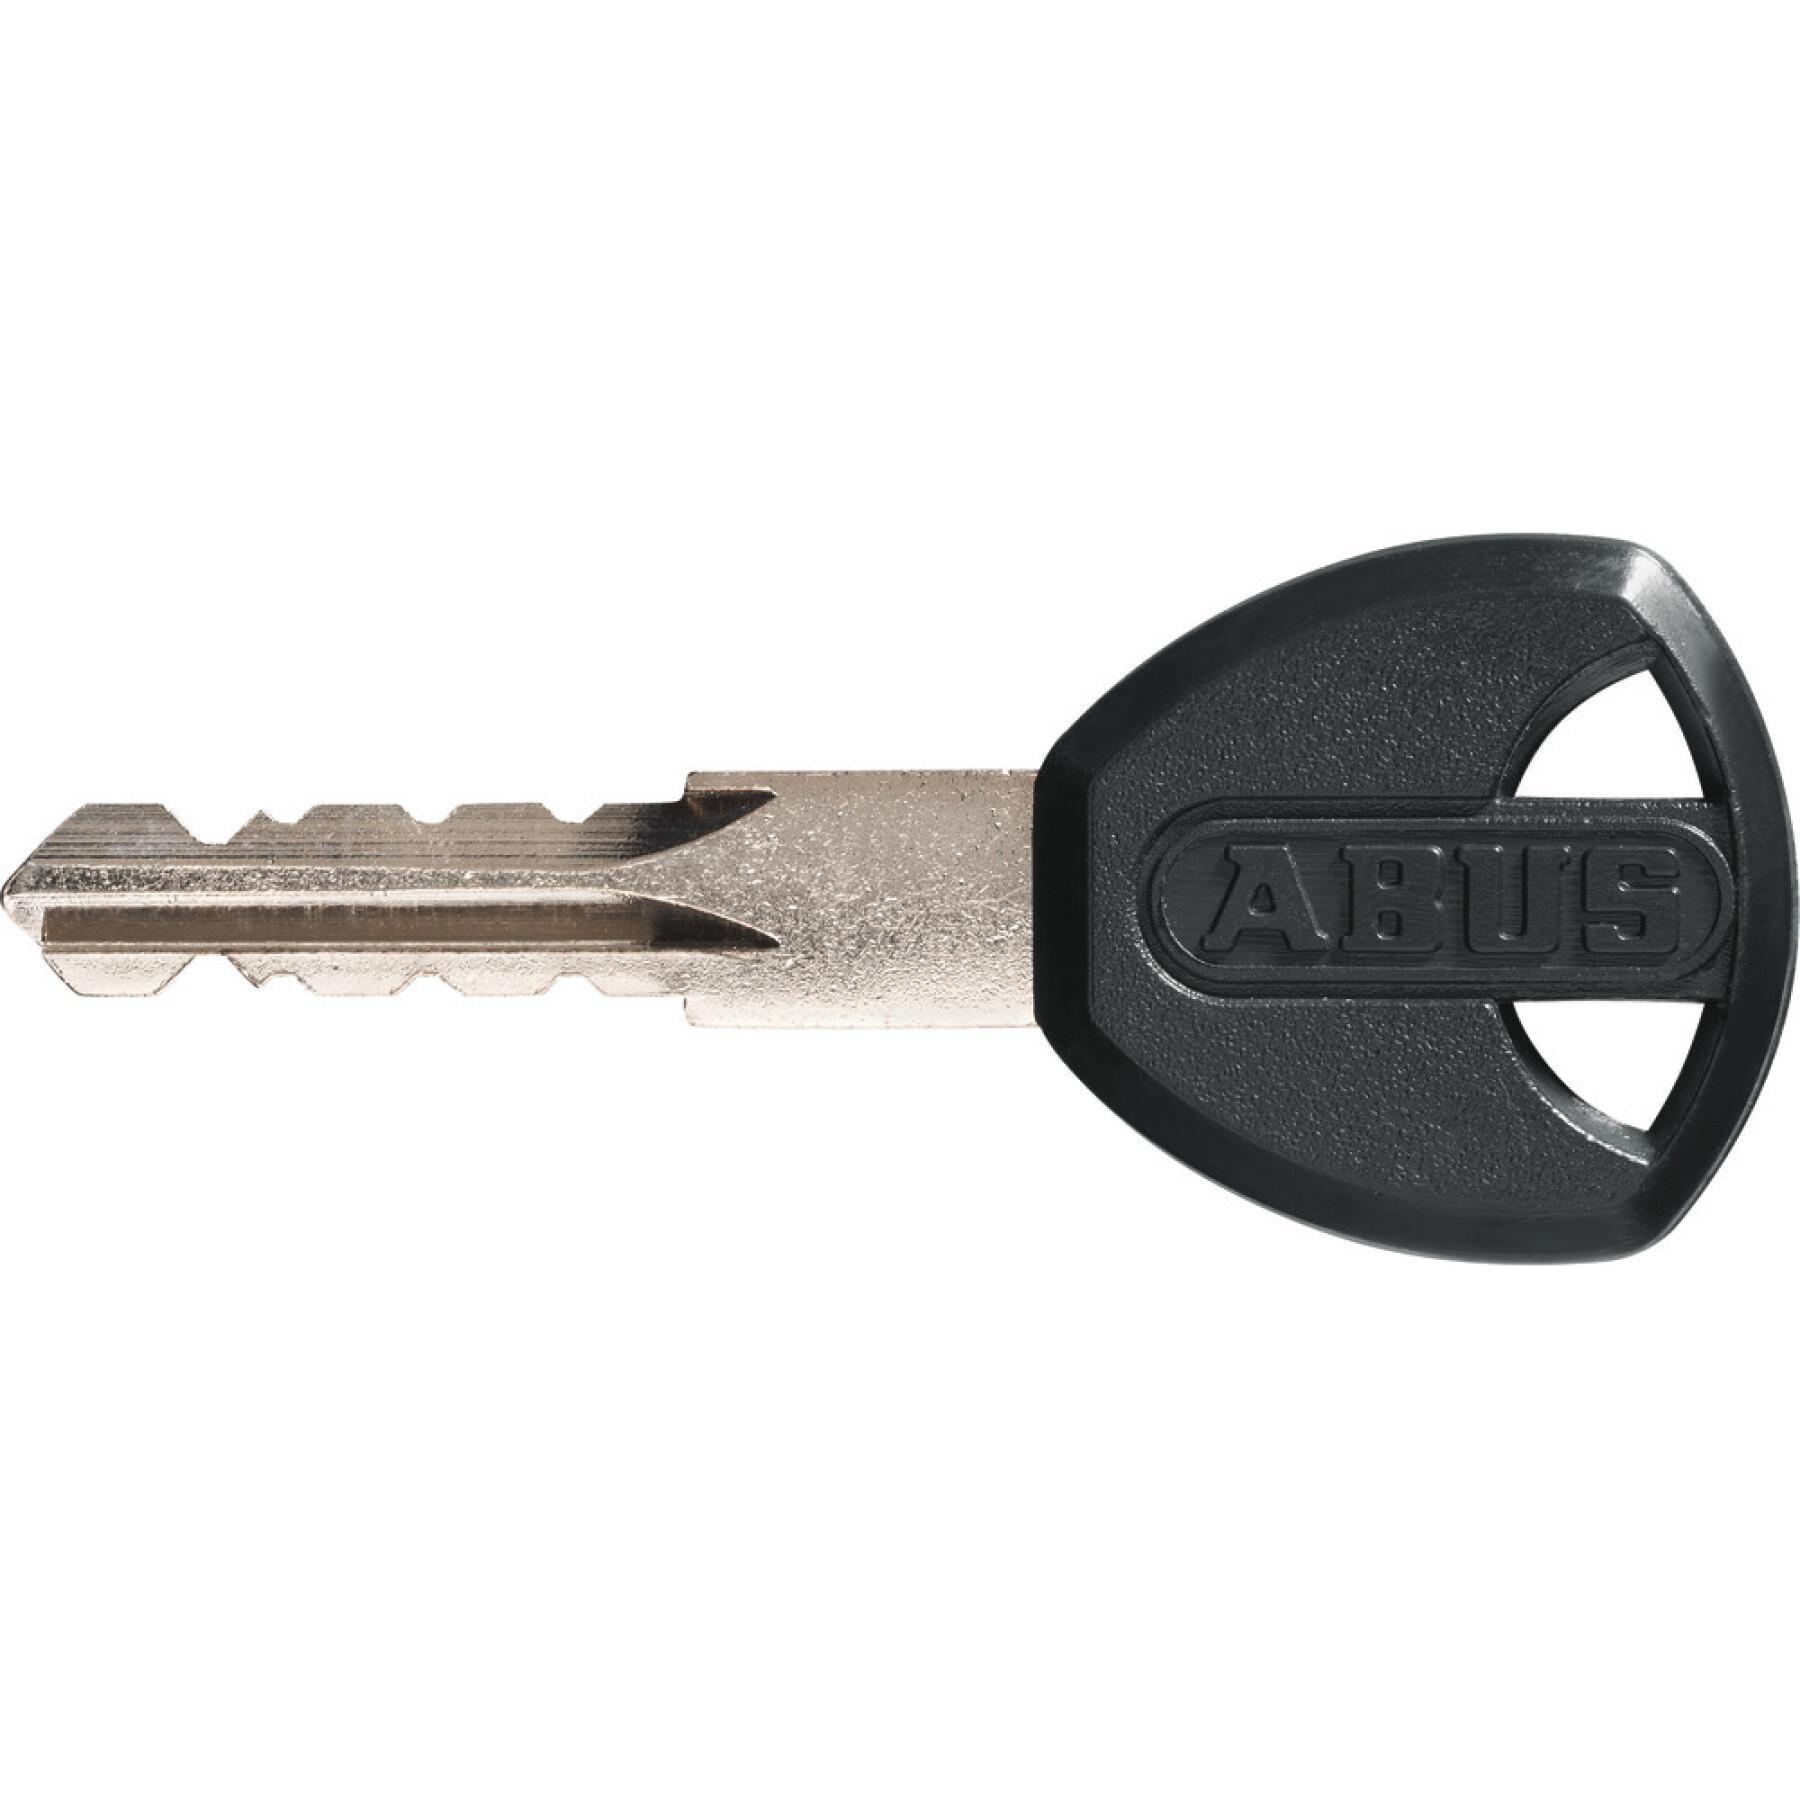 Cable lock Abus Star 4508K/150/8 color